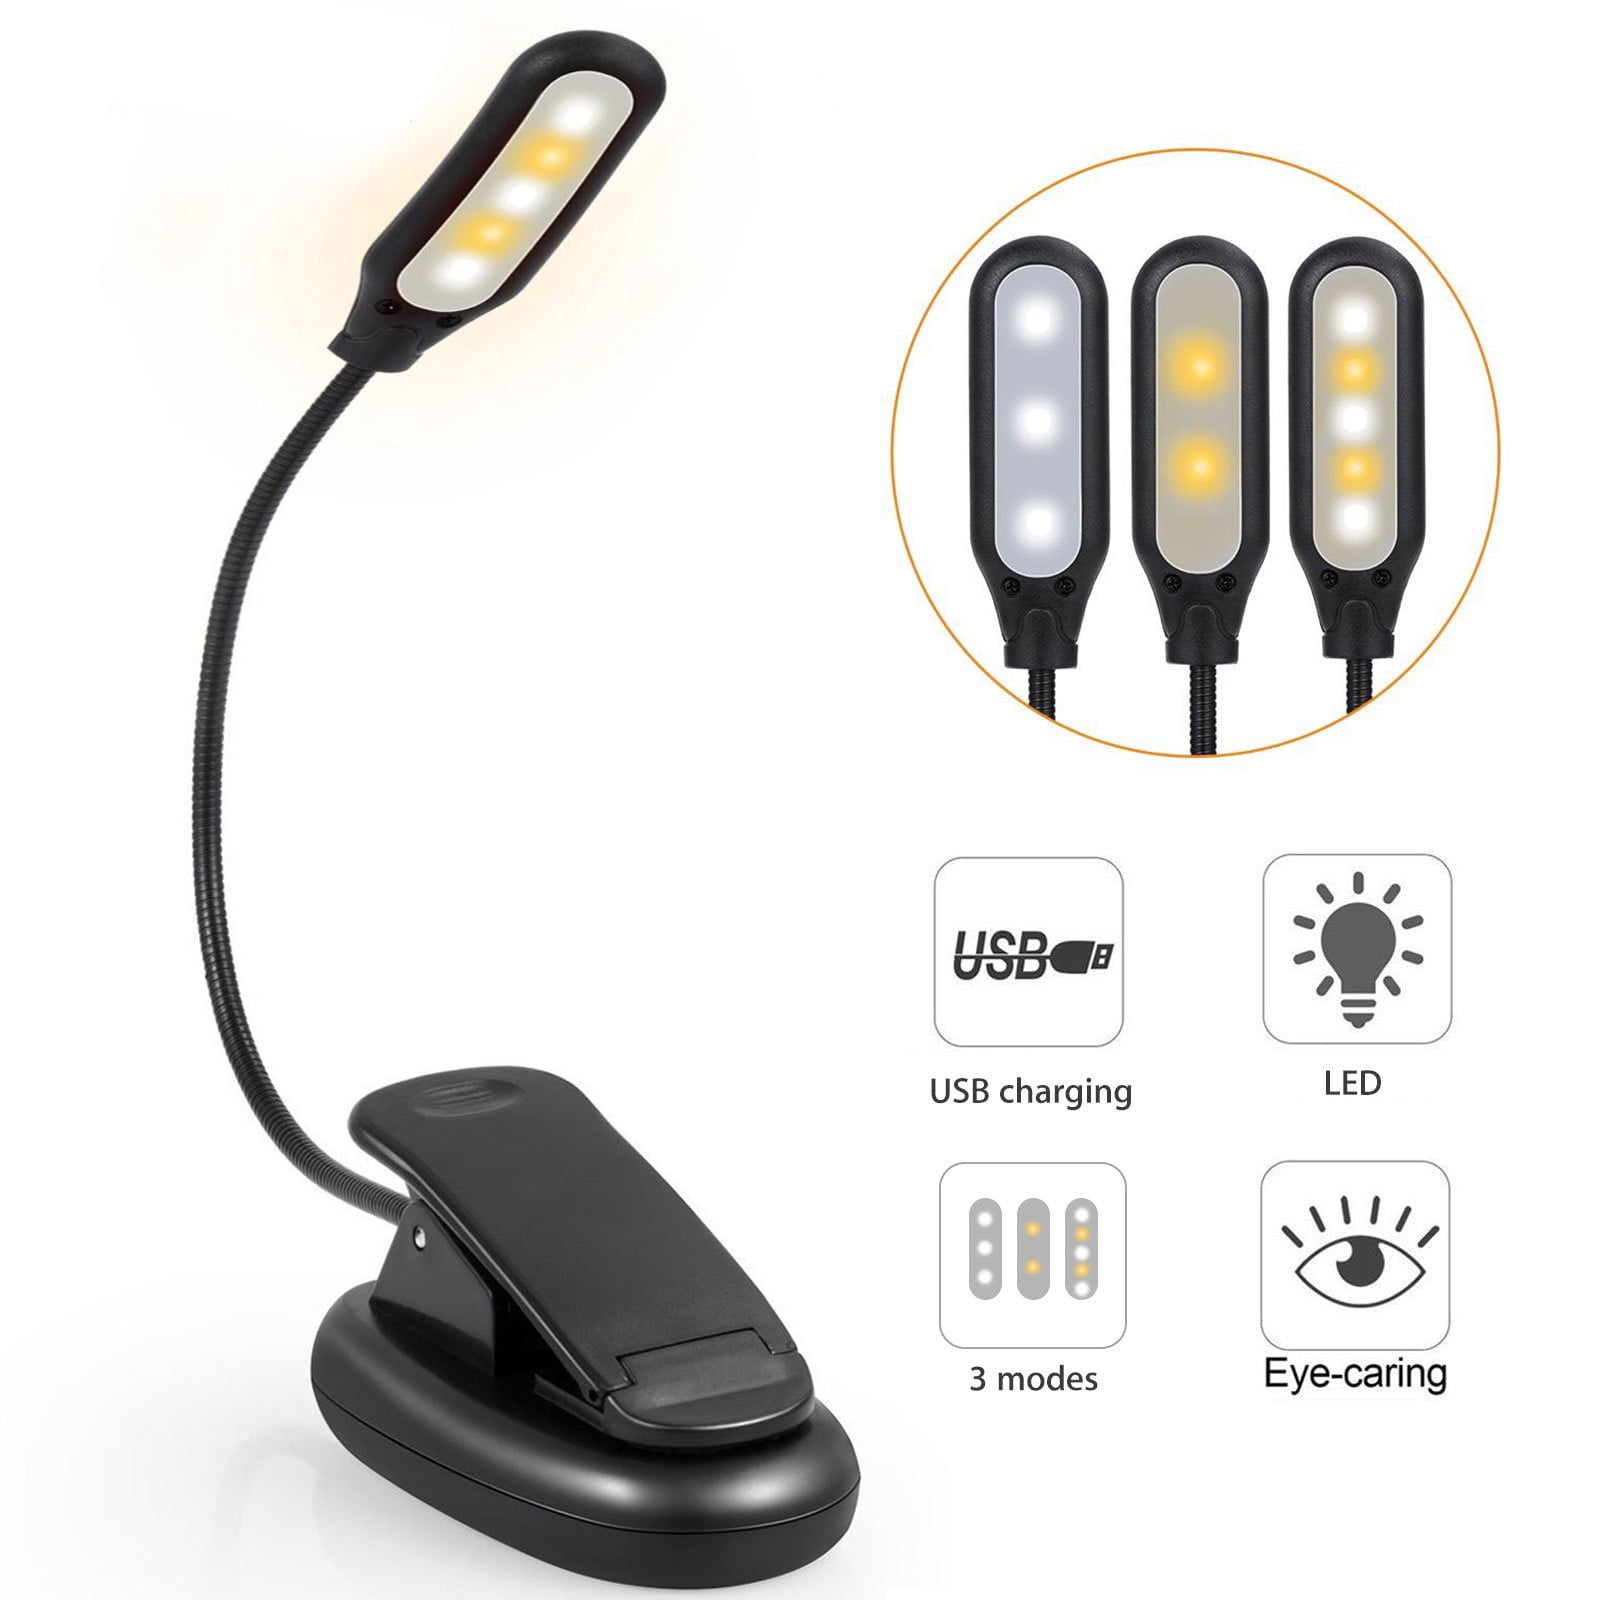 4 Large LED Flexible Neck Light Clip on USB Book Lamp Reading Rechargeable UK 